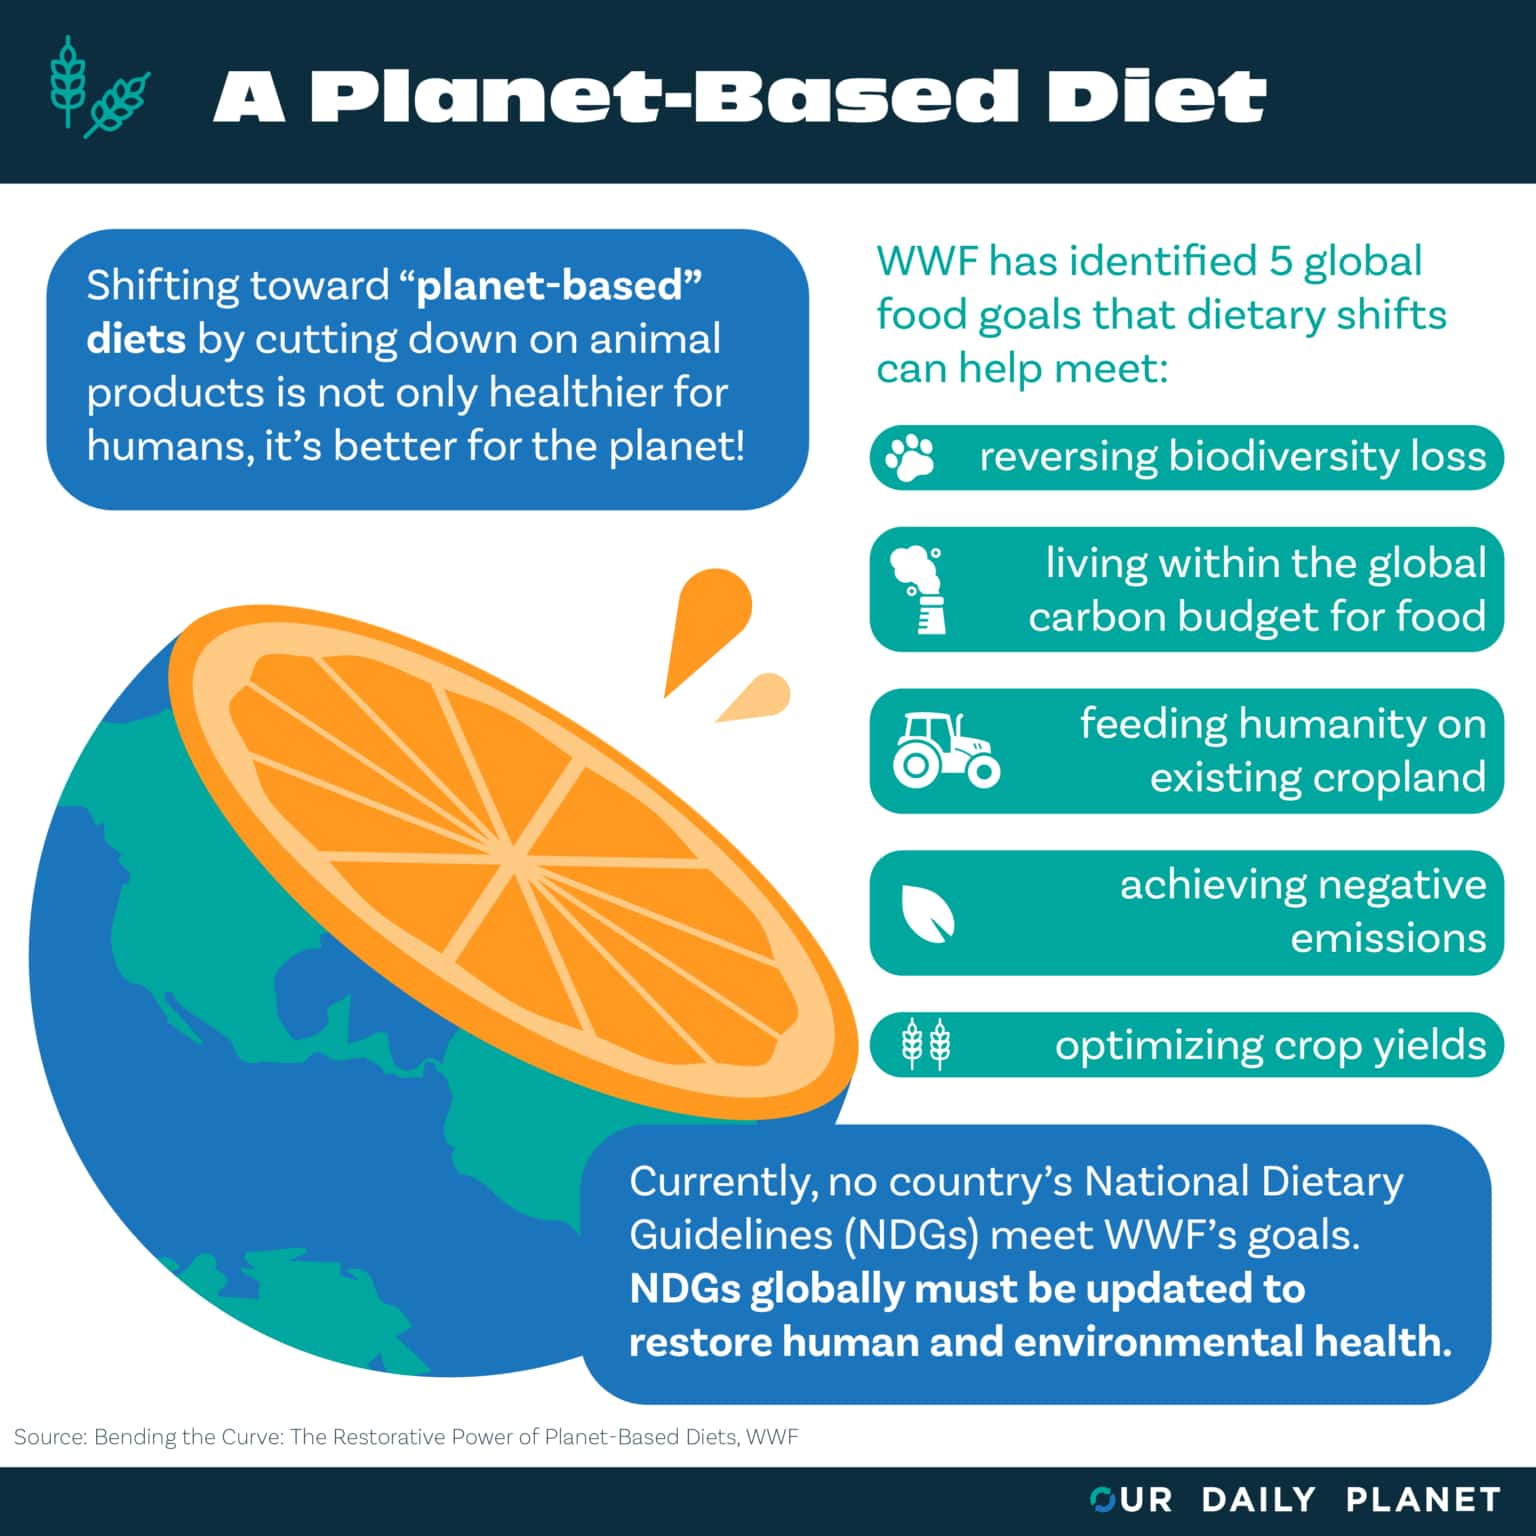 Data from Bending the Curve: The Restorative Power of Plant Based Diets from WWF.